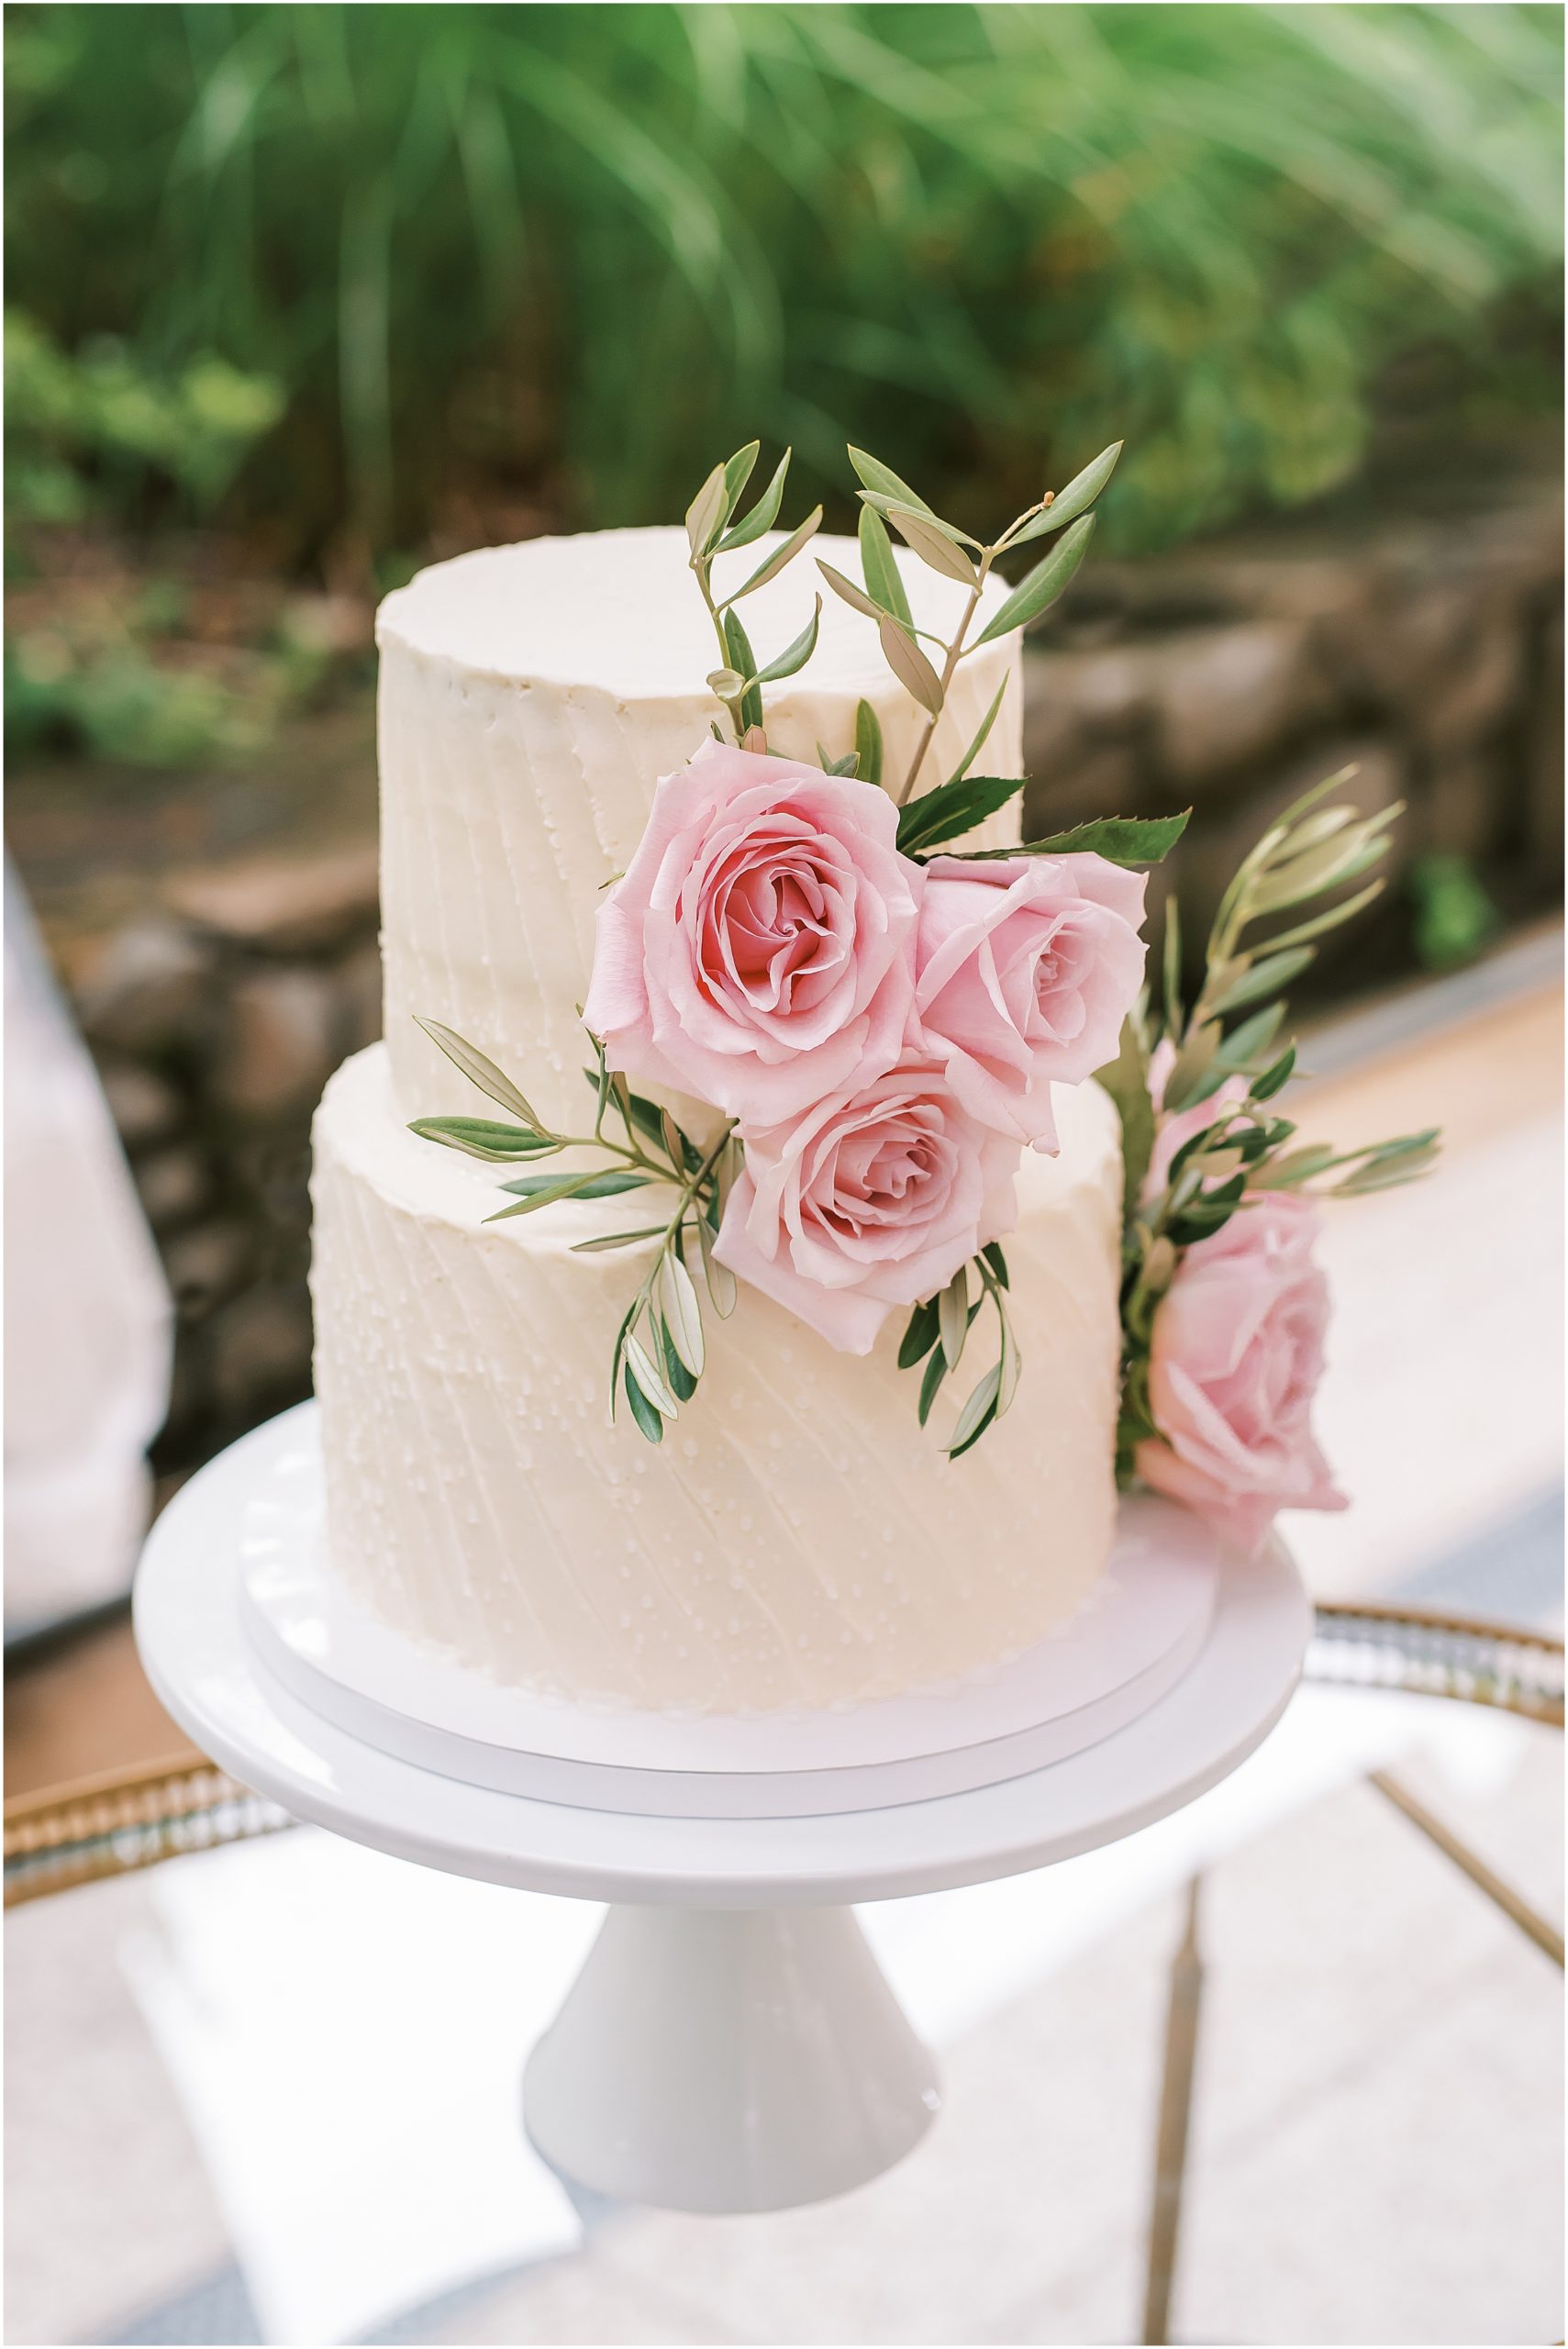 White two-tier wedding cake with pink roses